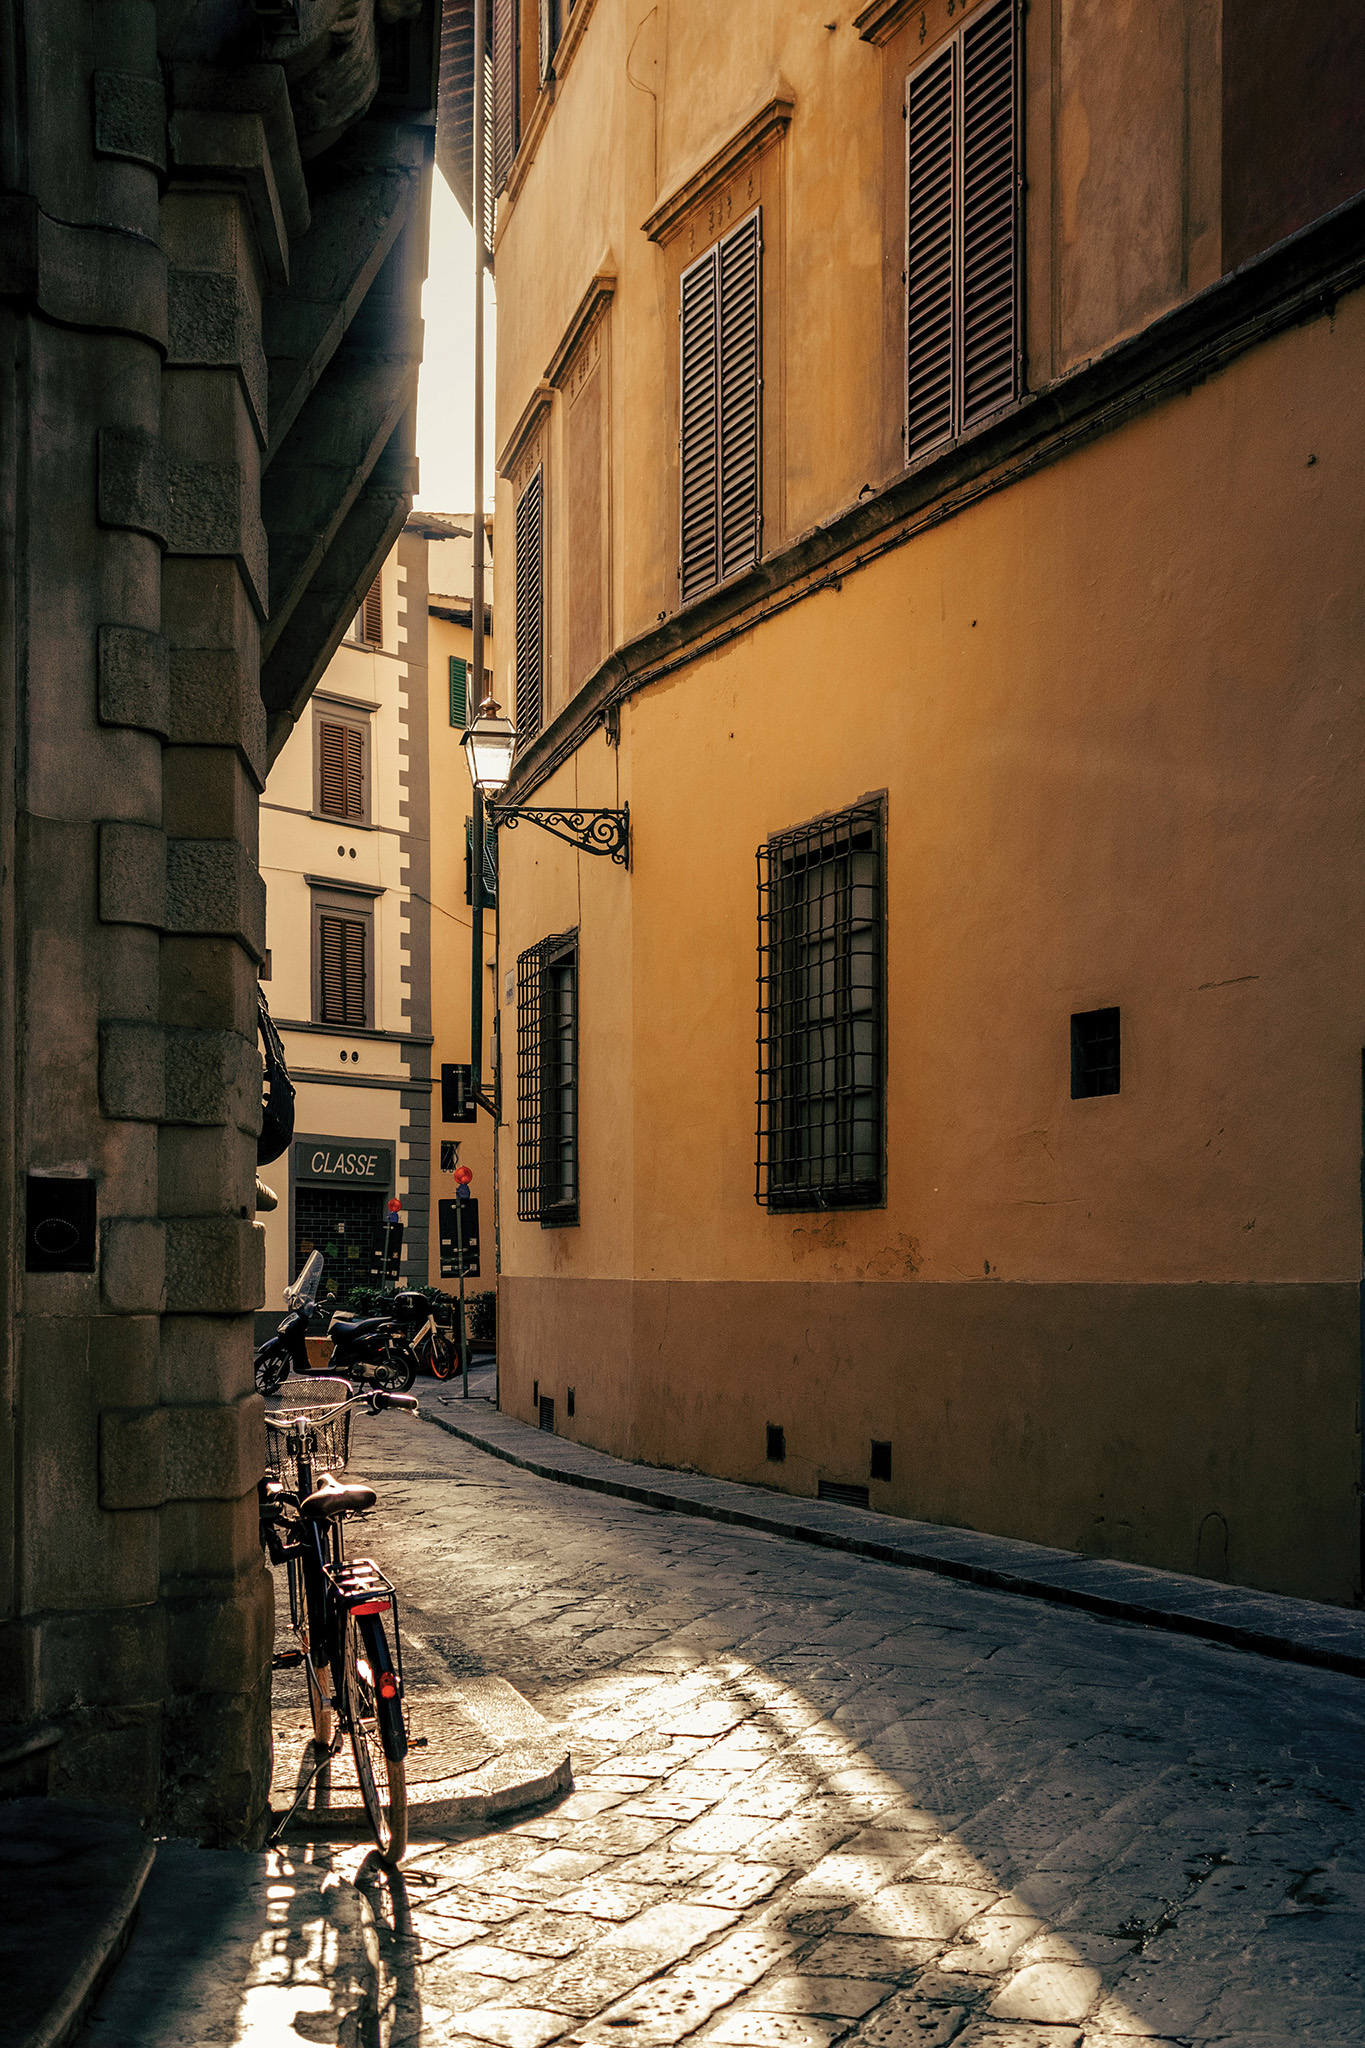 This acts as an example of an image after proper editing. It depicts a small alley with the first rays of sun shining through and illuminating a bike in the corner.